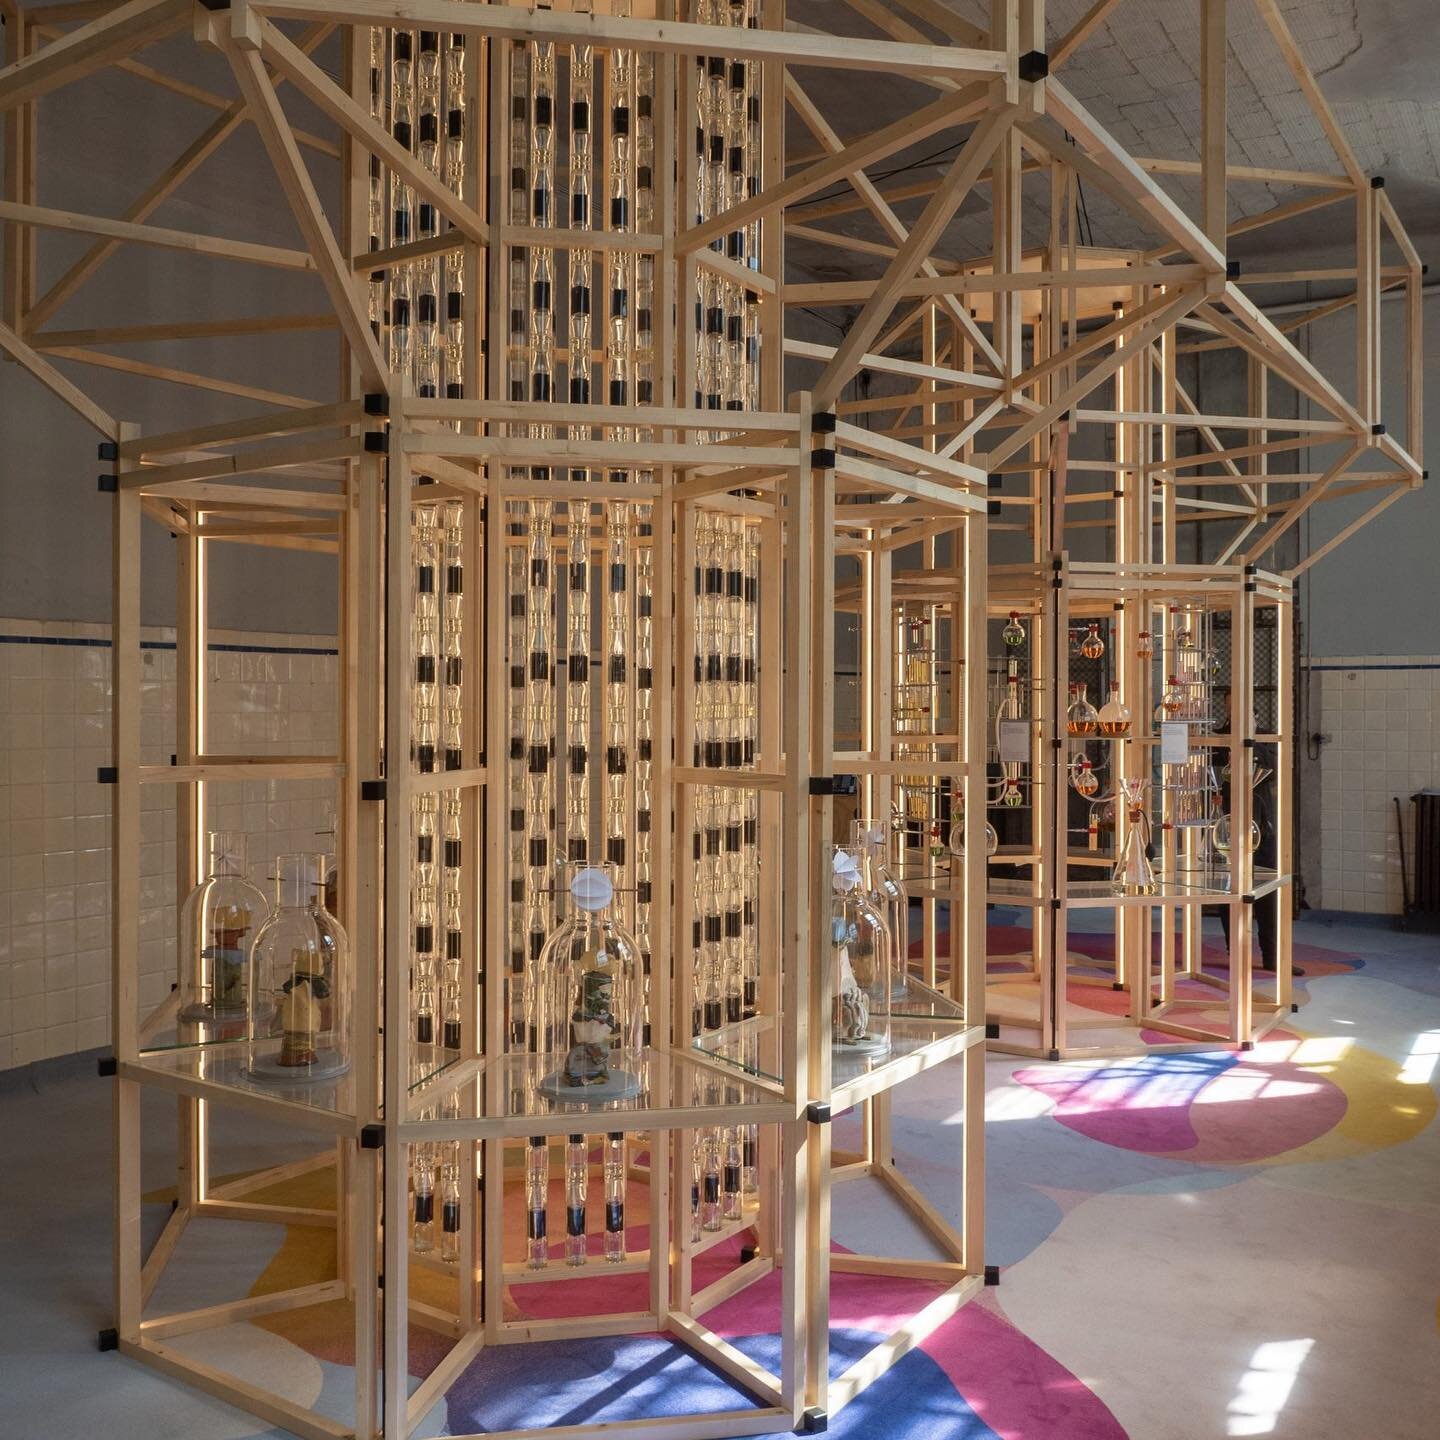 Exp&eacute;riences Immobiles was an olfactory installation made of two 13-foot/ 4-meter tall timber towers resembling factory chimneys at the annual Alcova exhibit at Milan Design week last week. 

One tower held smellable clay sculptures infused wit